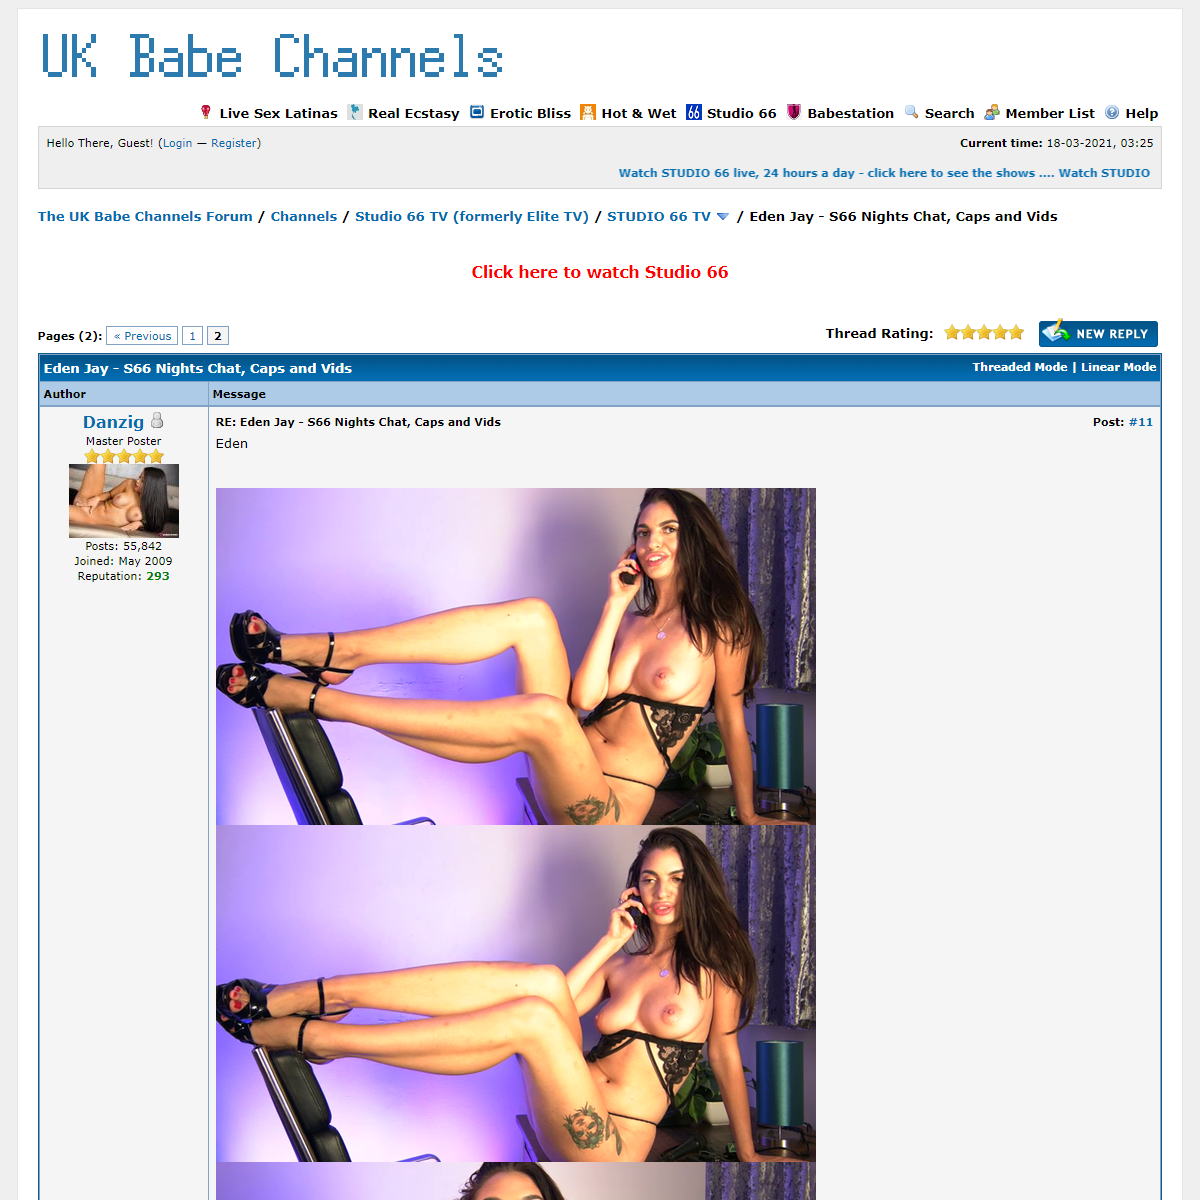 A complete backup of https://babeshows.co.uk/showthread.php?tid=81700&page=2